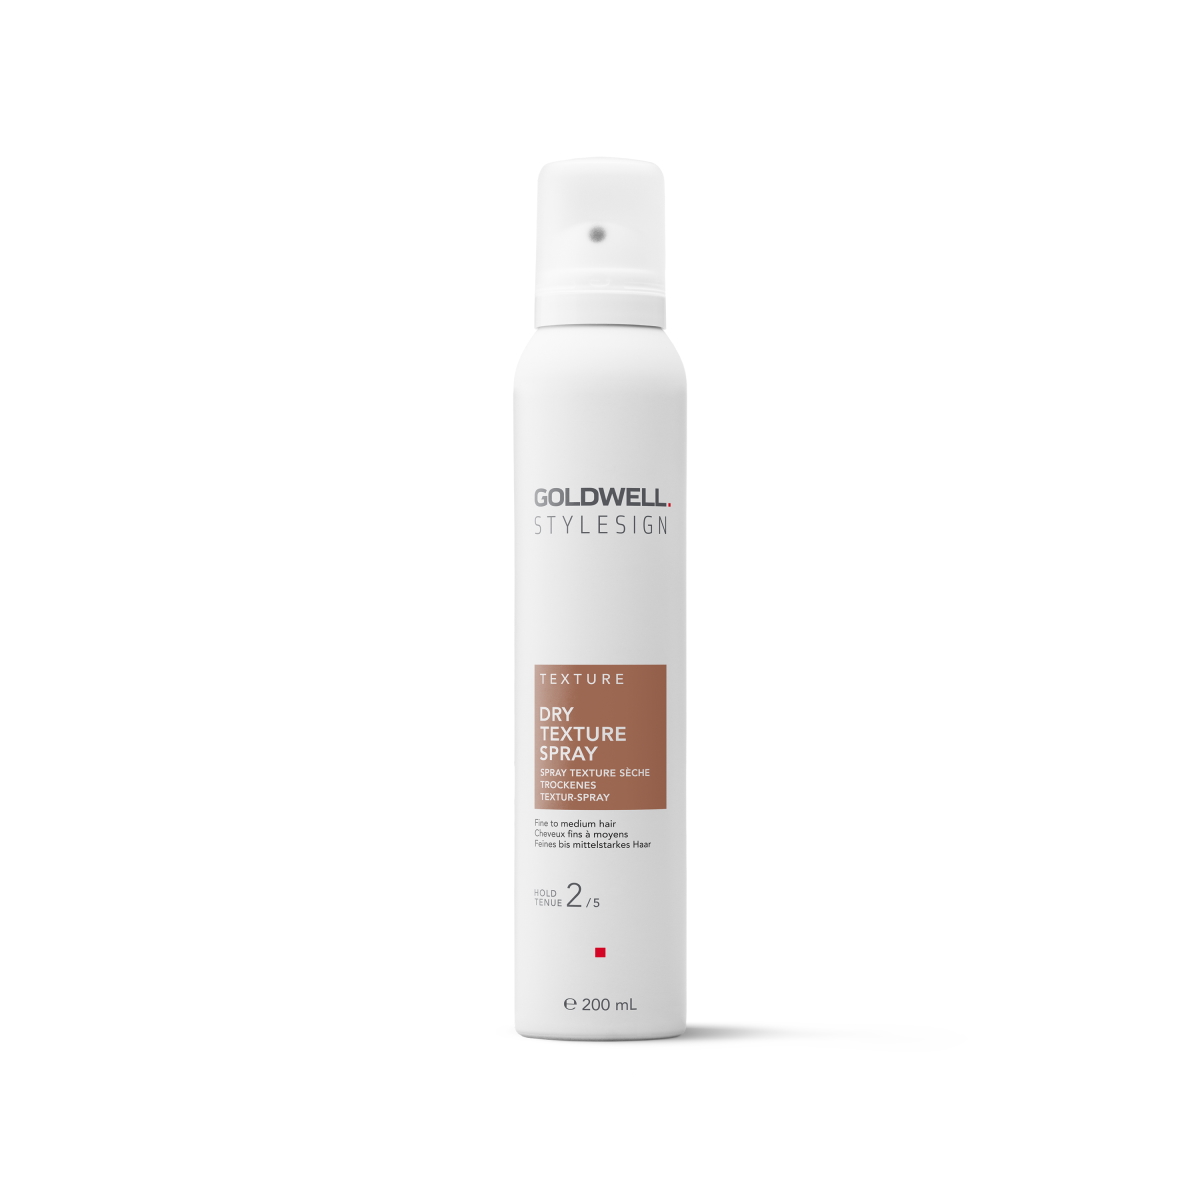 Goldwell Style Sign Texture Dry Texture Spray 200ml